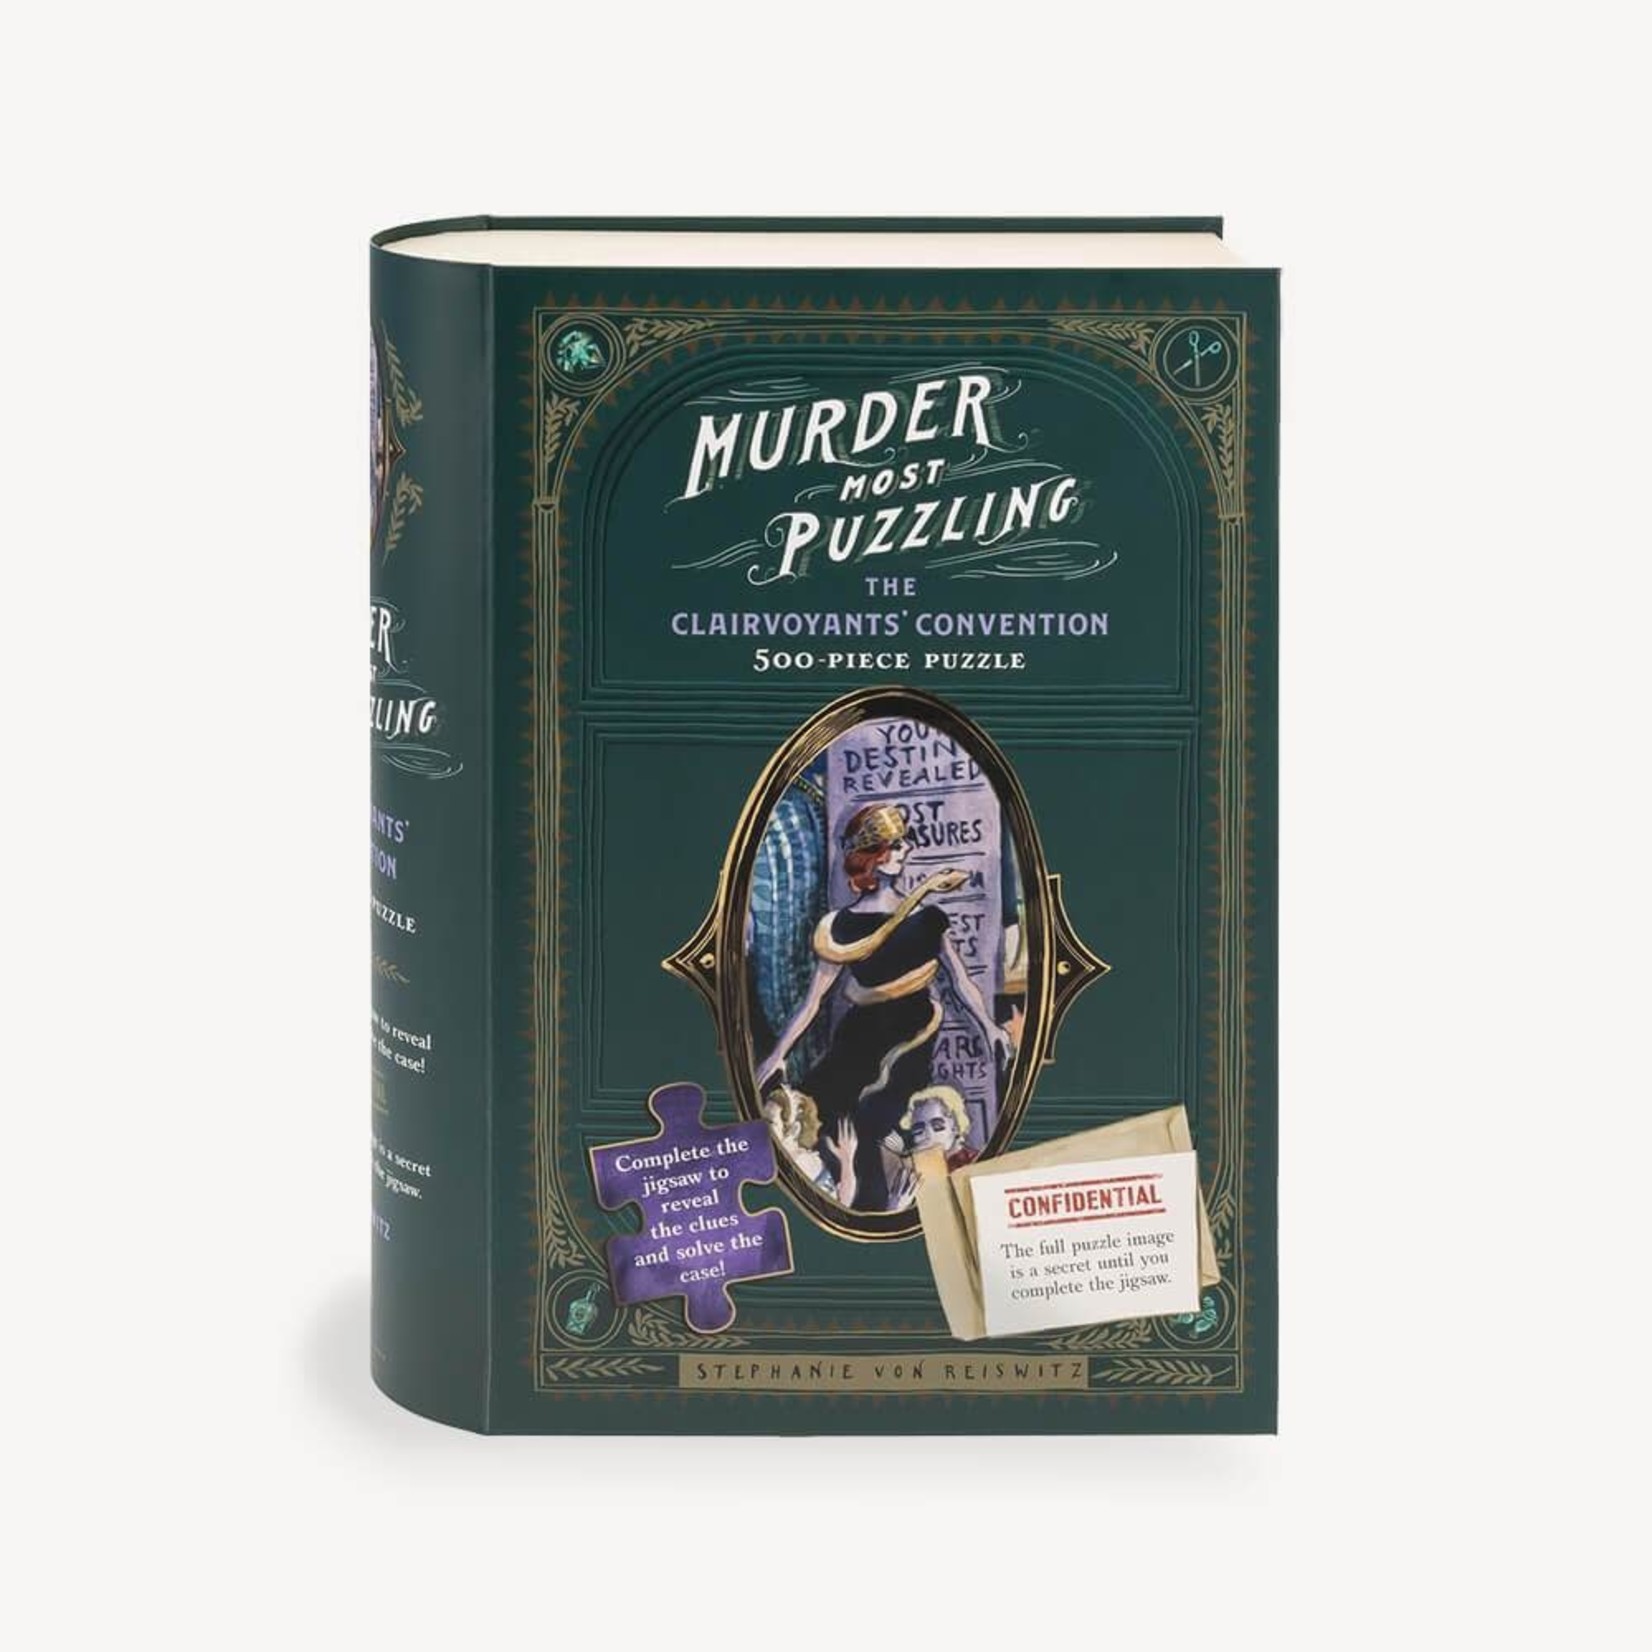 Chronicle Books Murder Most Puzzling The Clairvoyants' Convention 500-Piece Puzzle